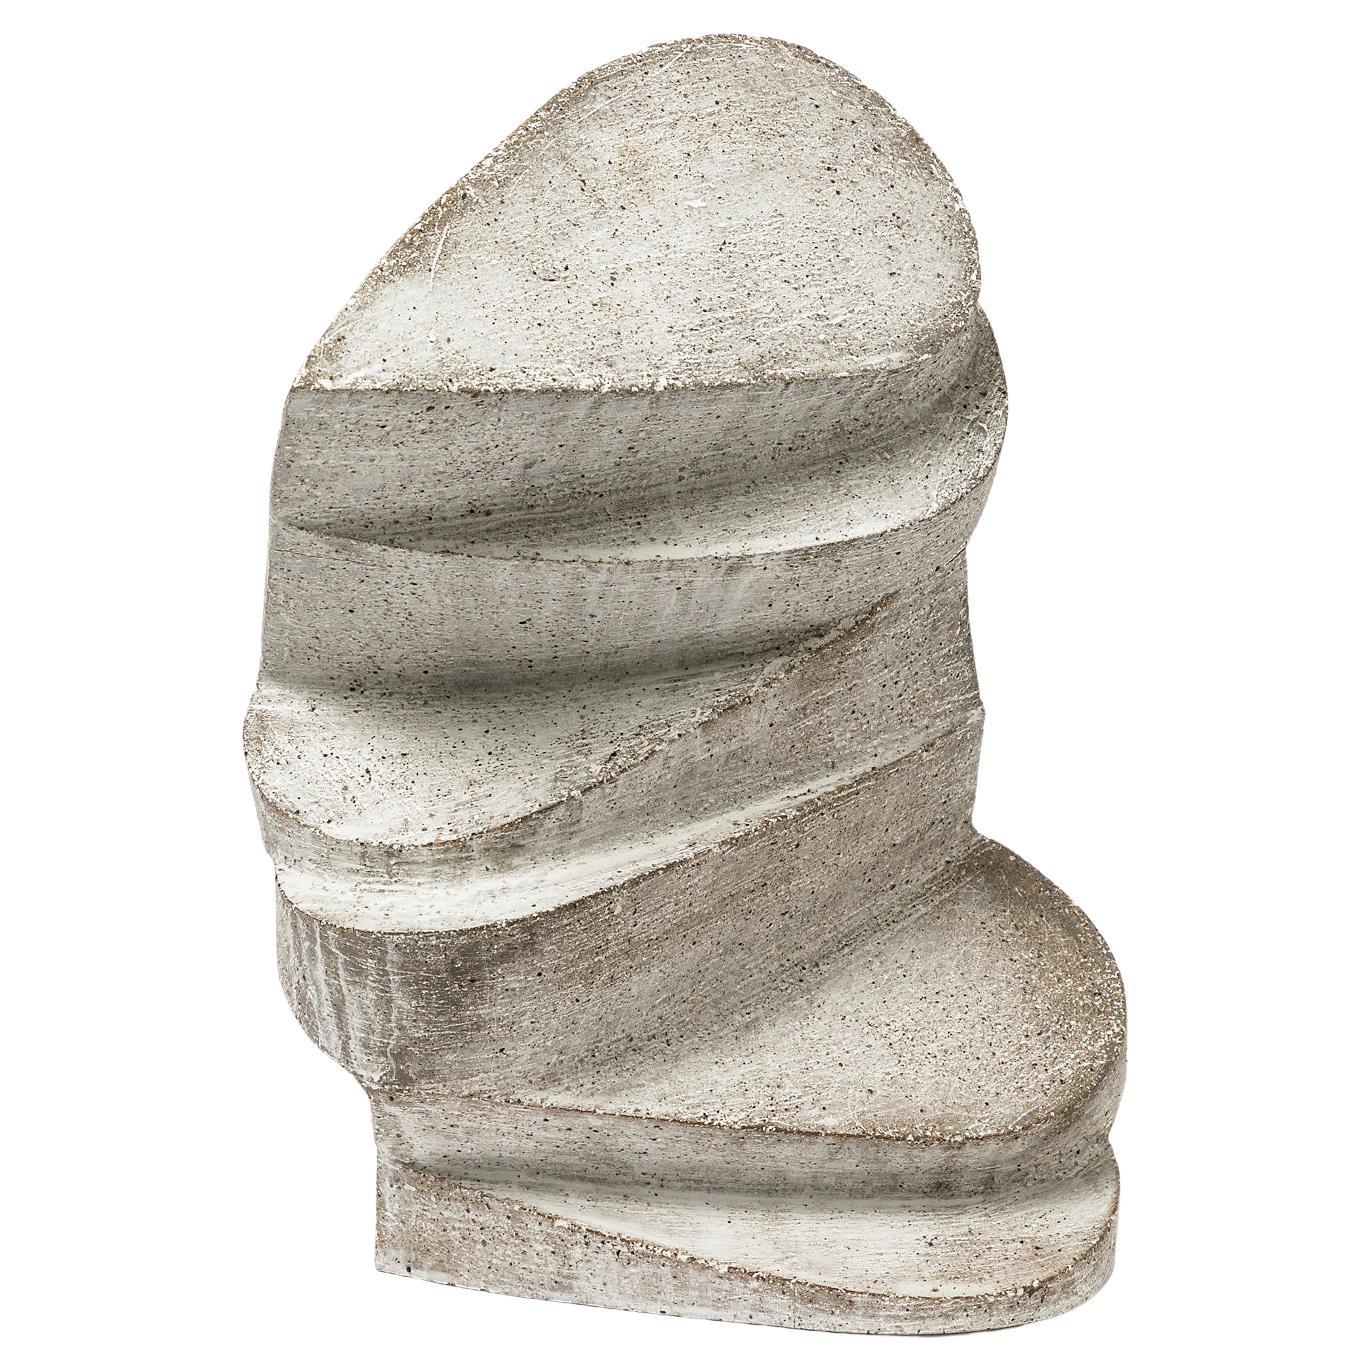 Stoneware Sculpture by Maarten Stuer, Entitled "Bloc in Motion", 2020 For Sale